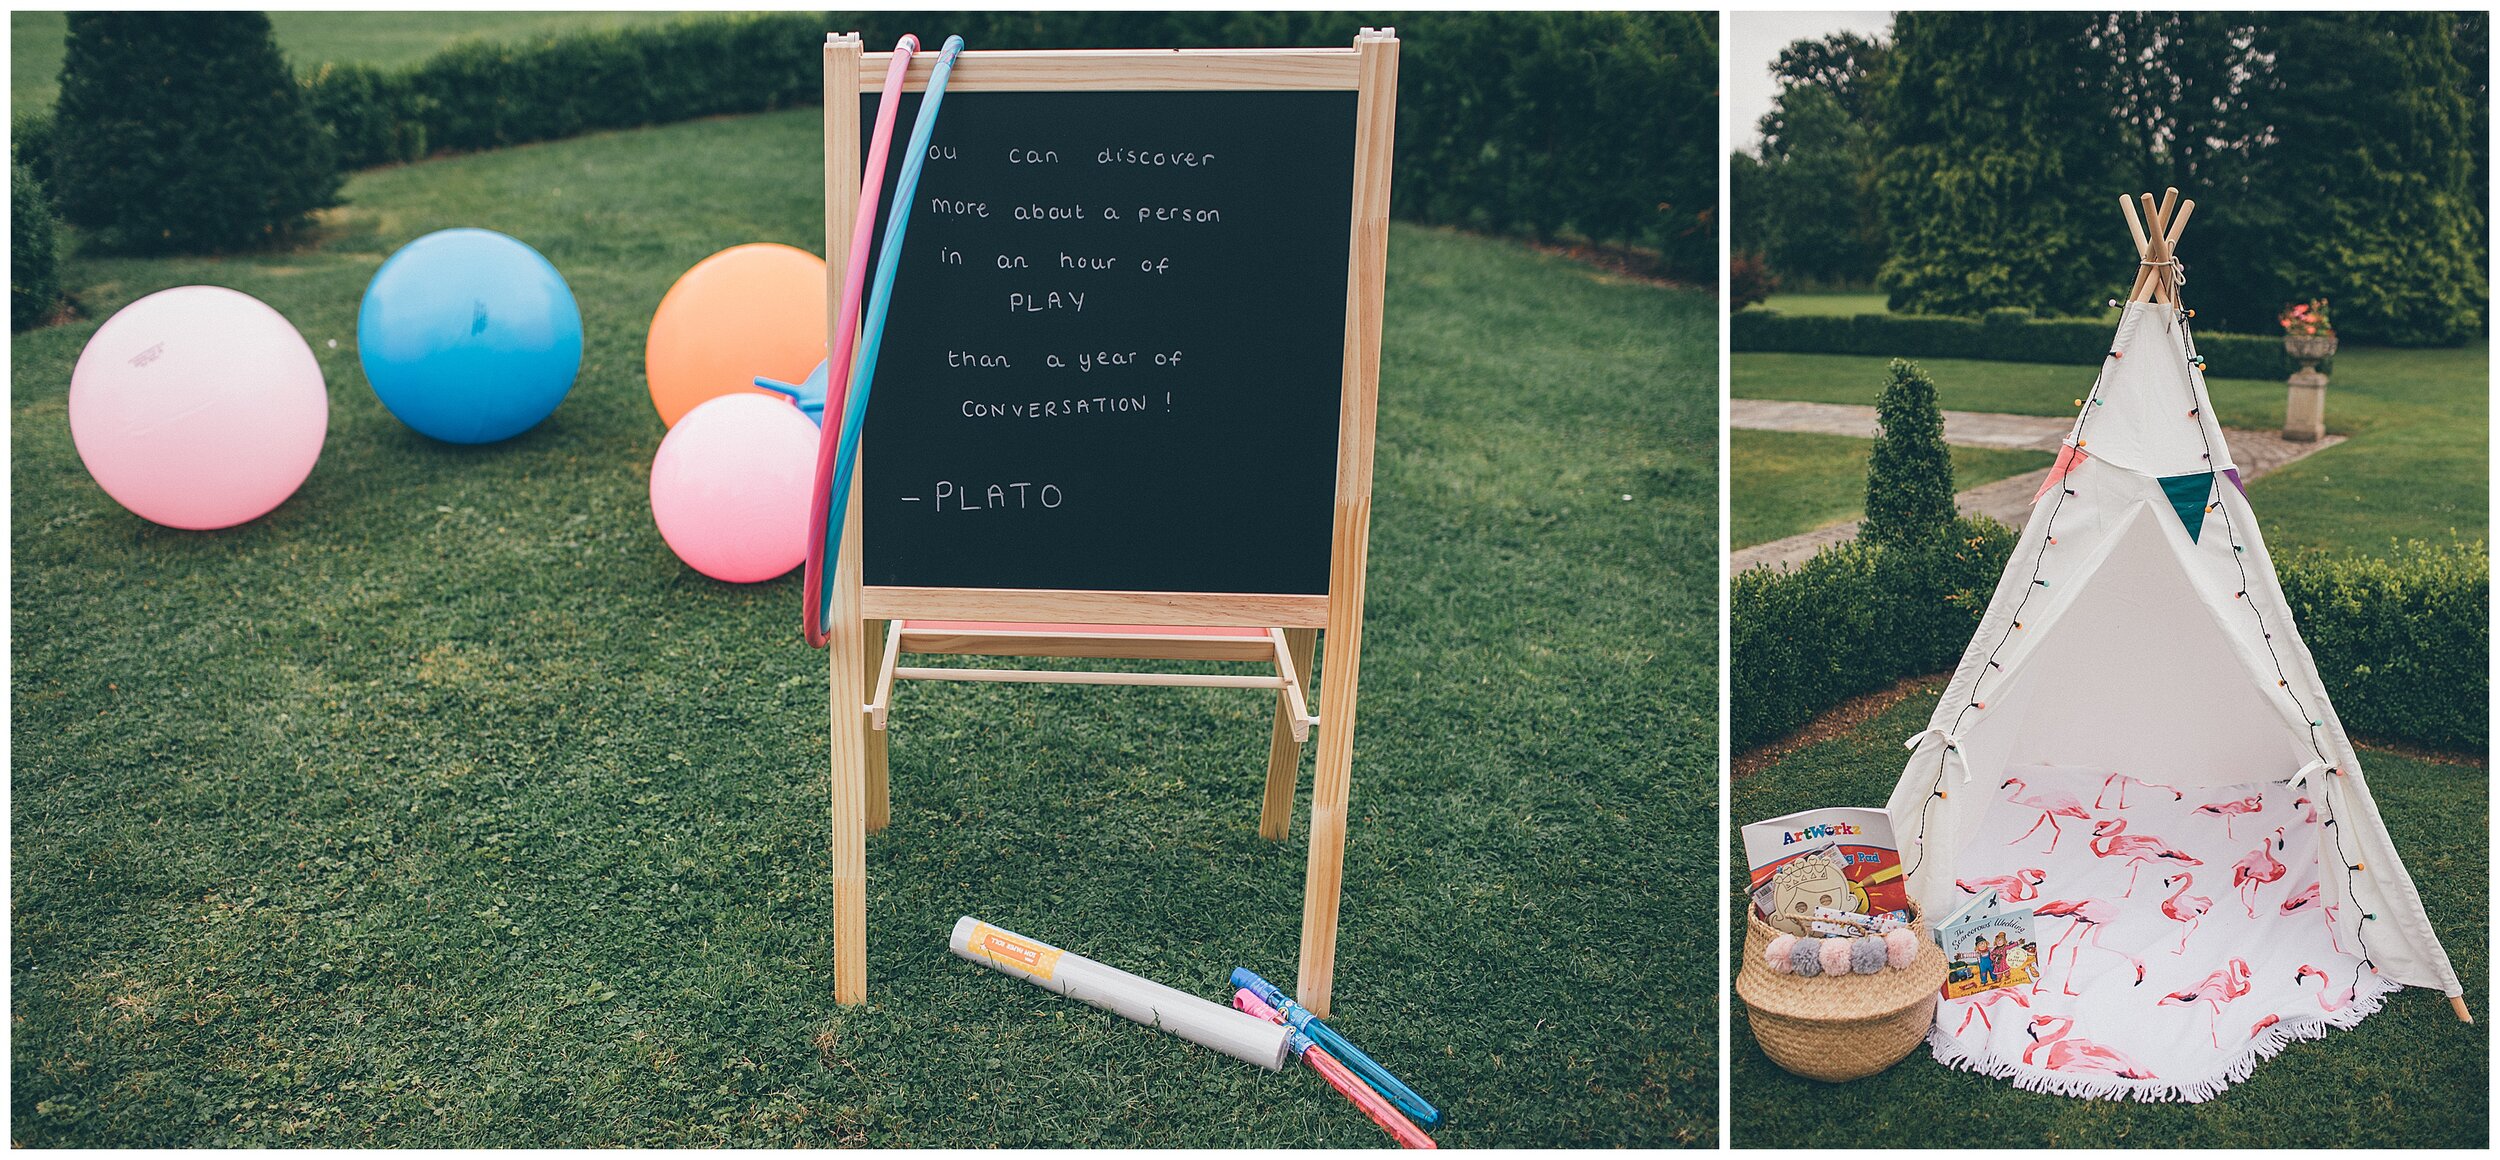 Space hoppers and fun activities for children at Lemore Manor wedding.